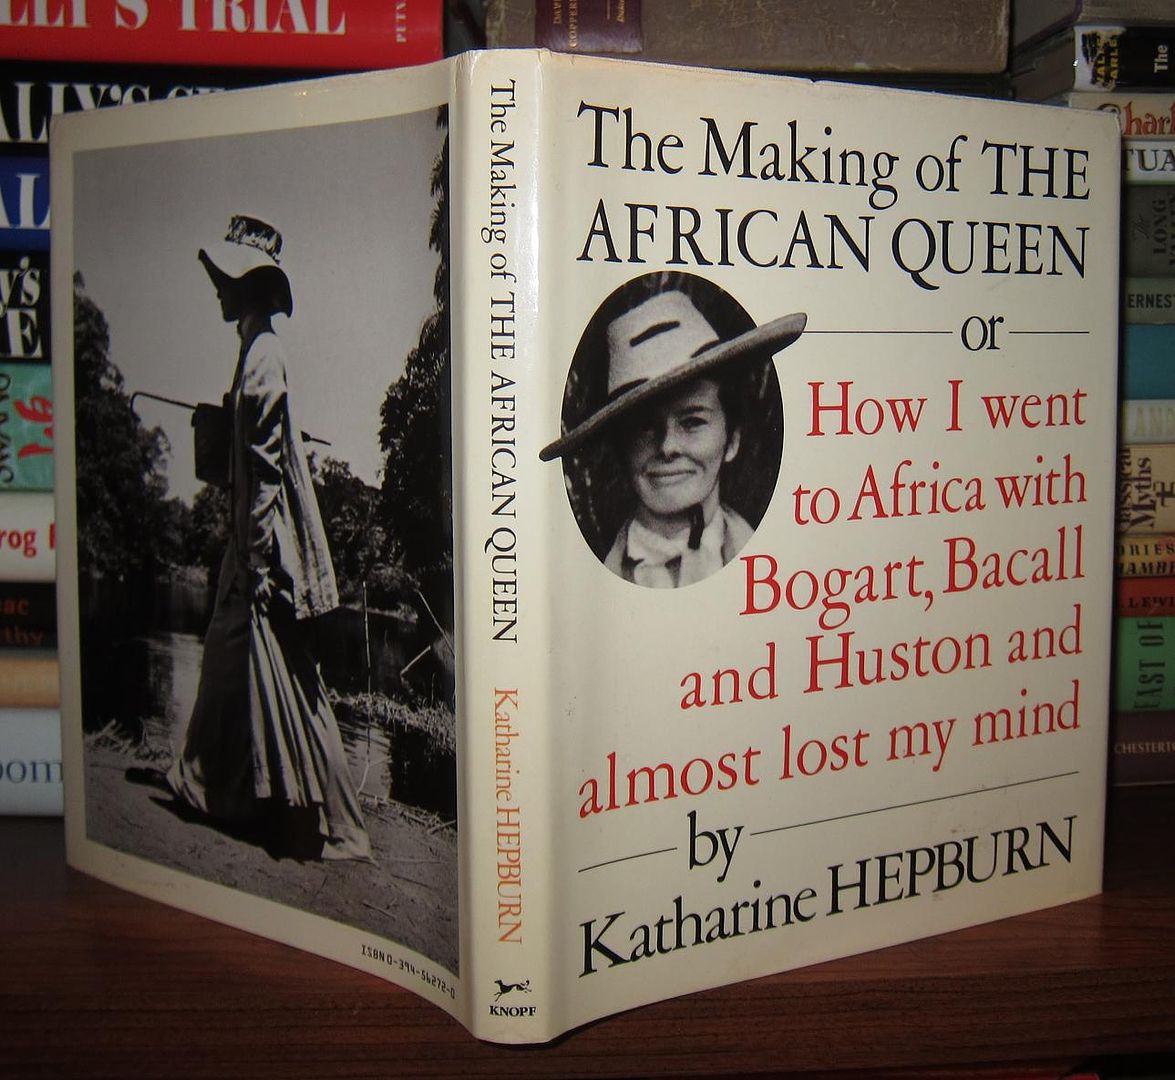 HEPBURN, KATHARINE - The Making of the African Queen or How I Went to Africa with Bogart, Bacall and Huston and Almost Lost My Mind